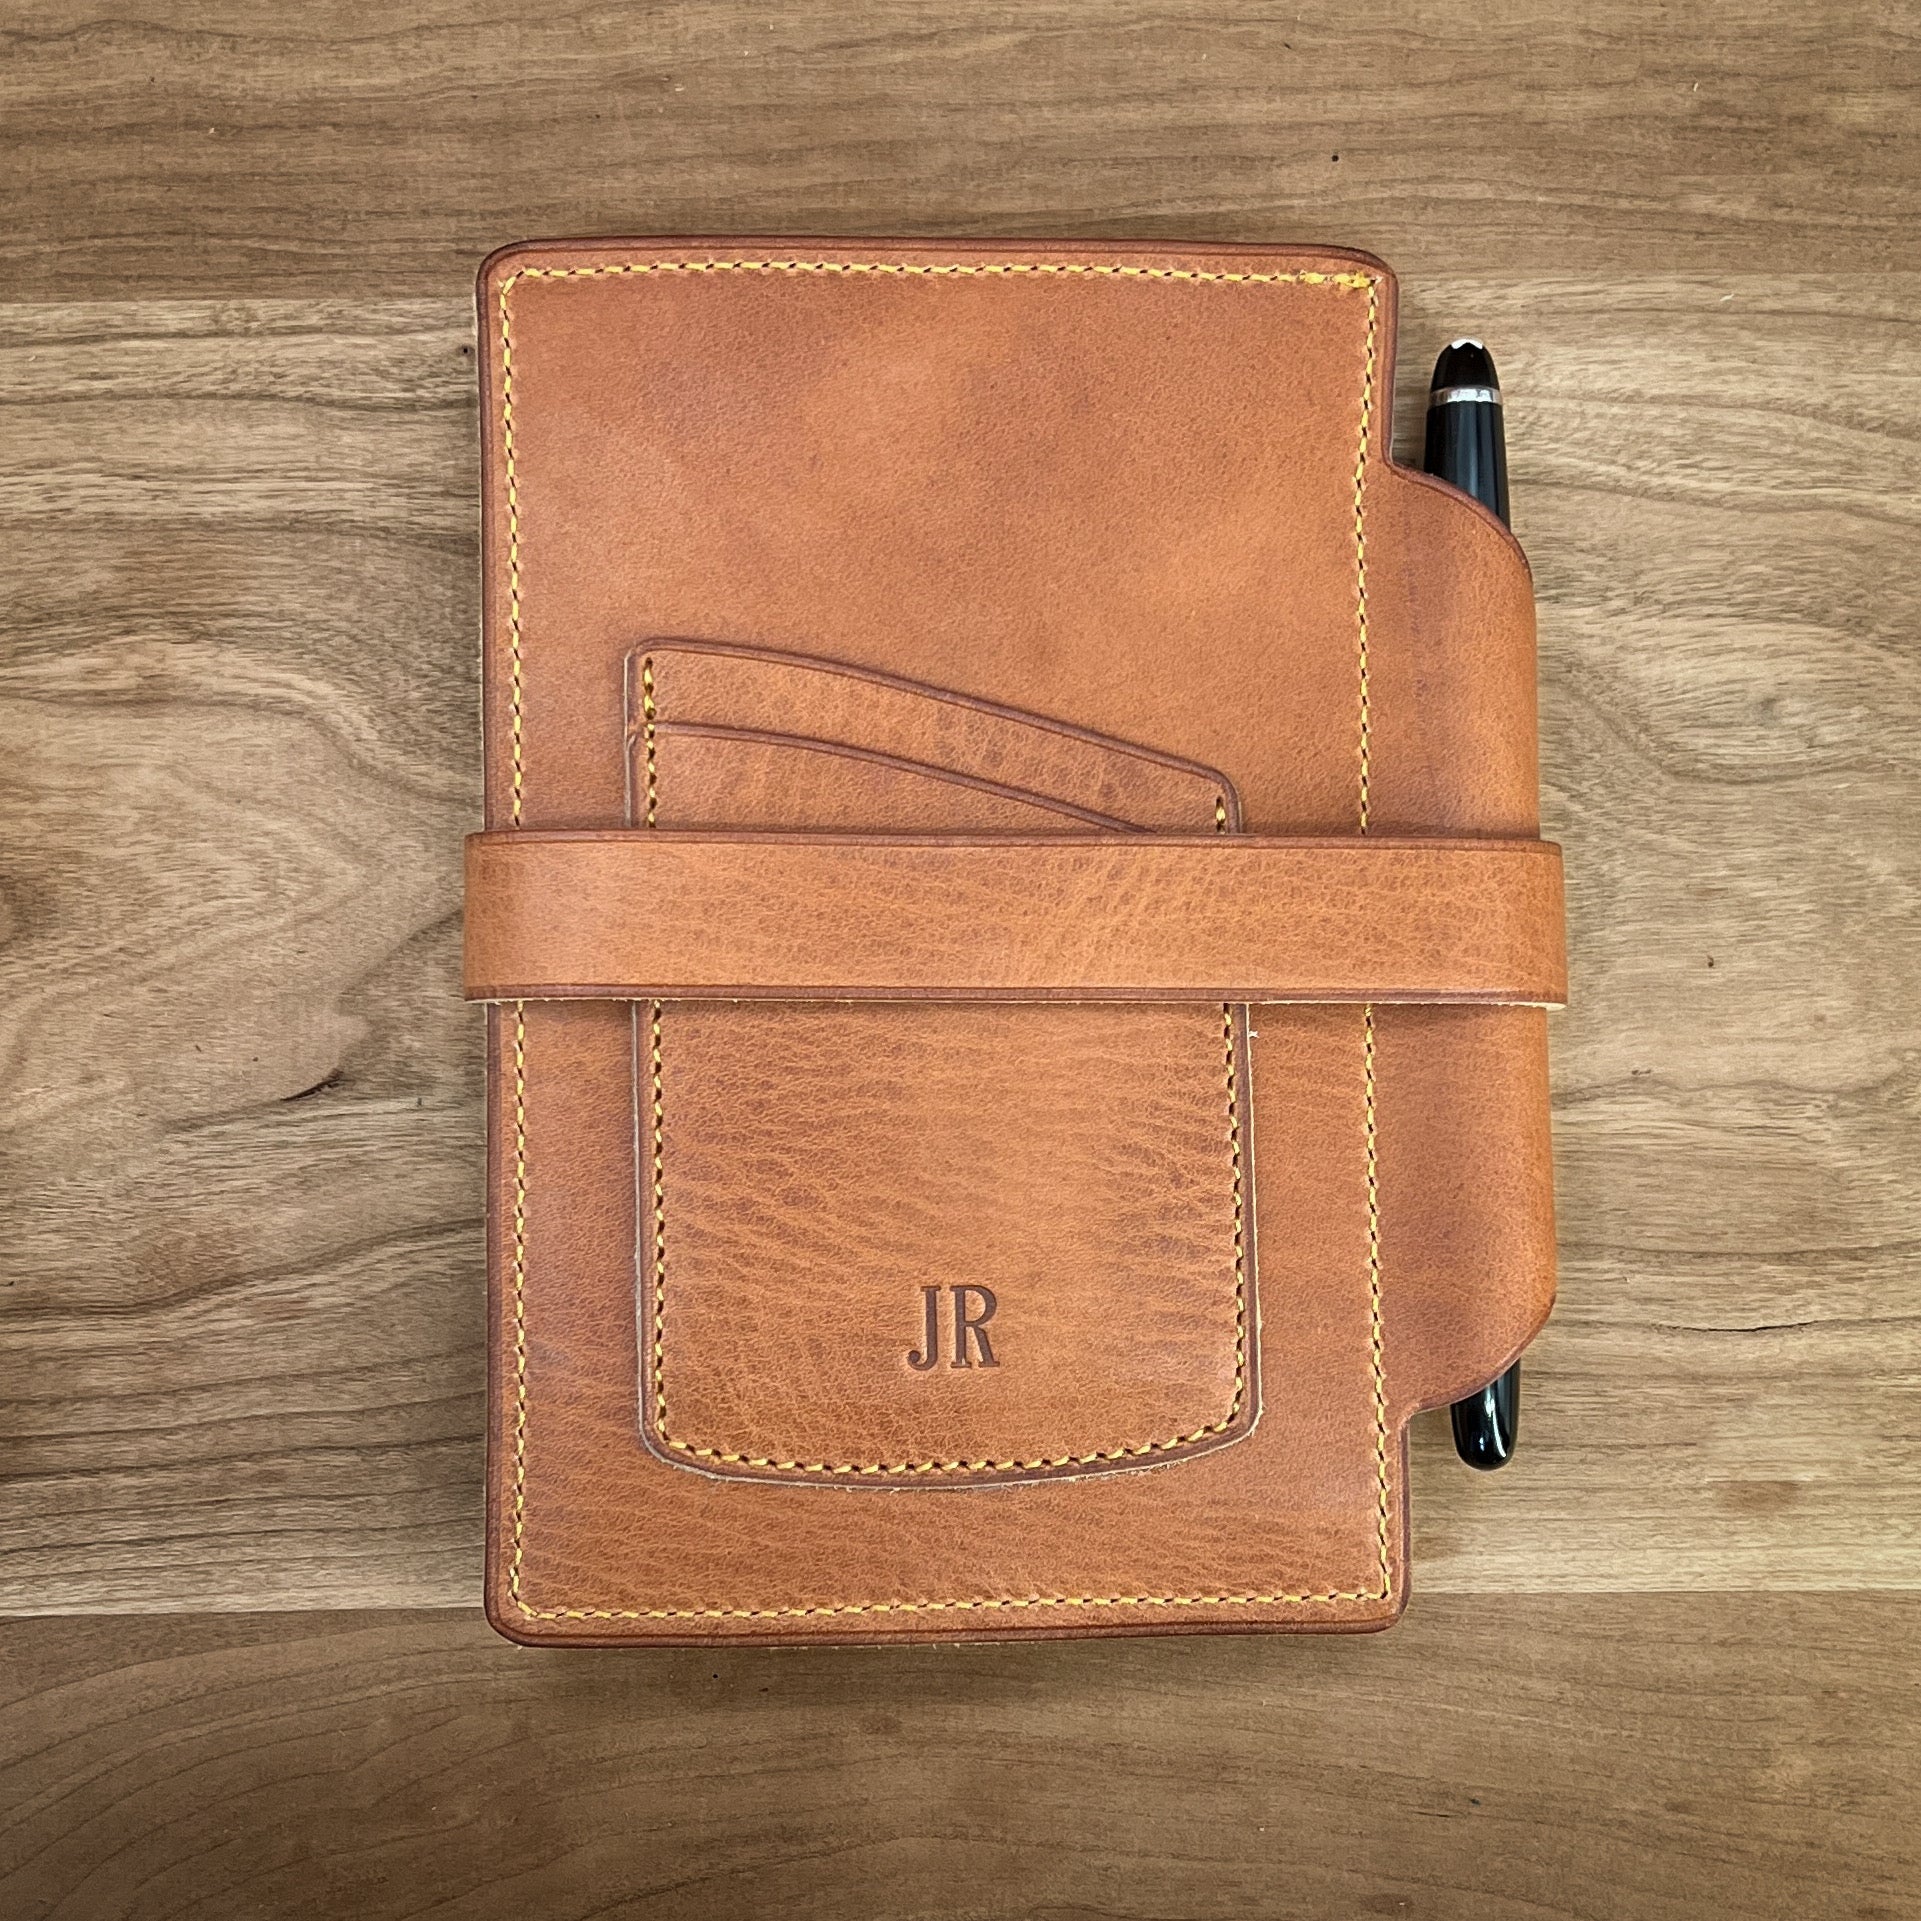 Two pocket version of the Handmade Jotter Style Cover for Field Notes Heavy Duty Flip Notebook